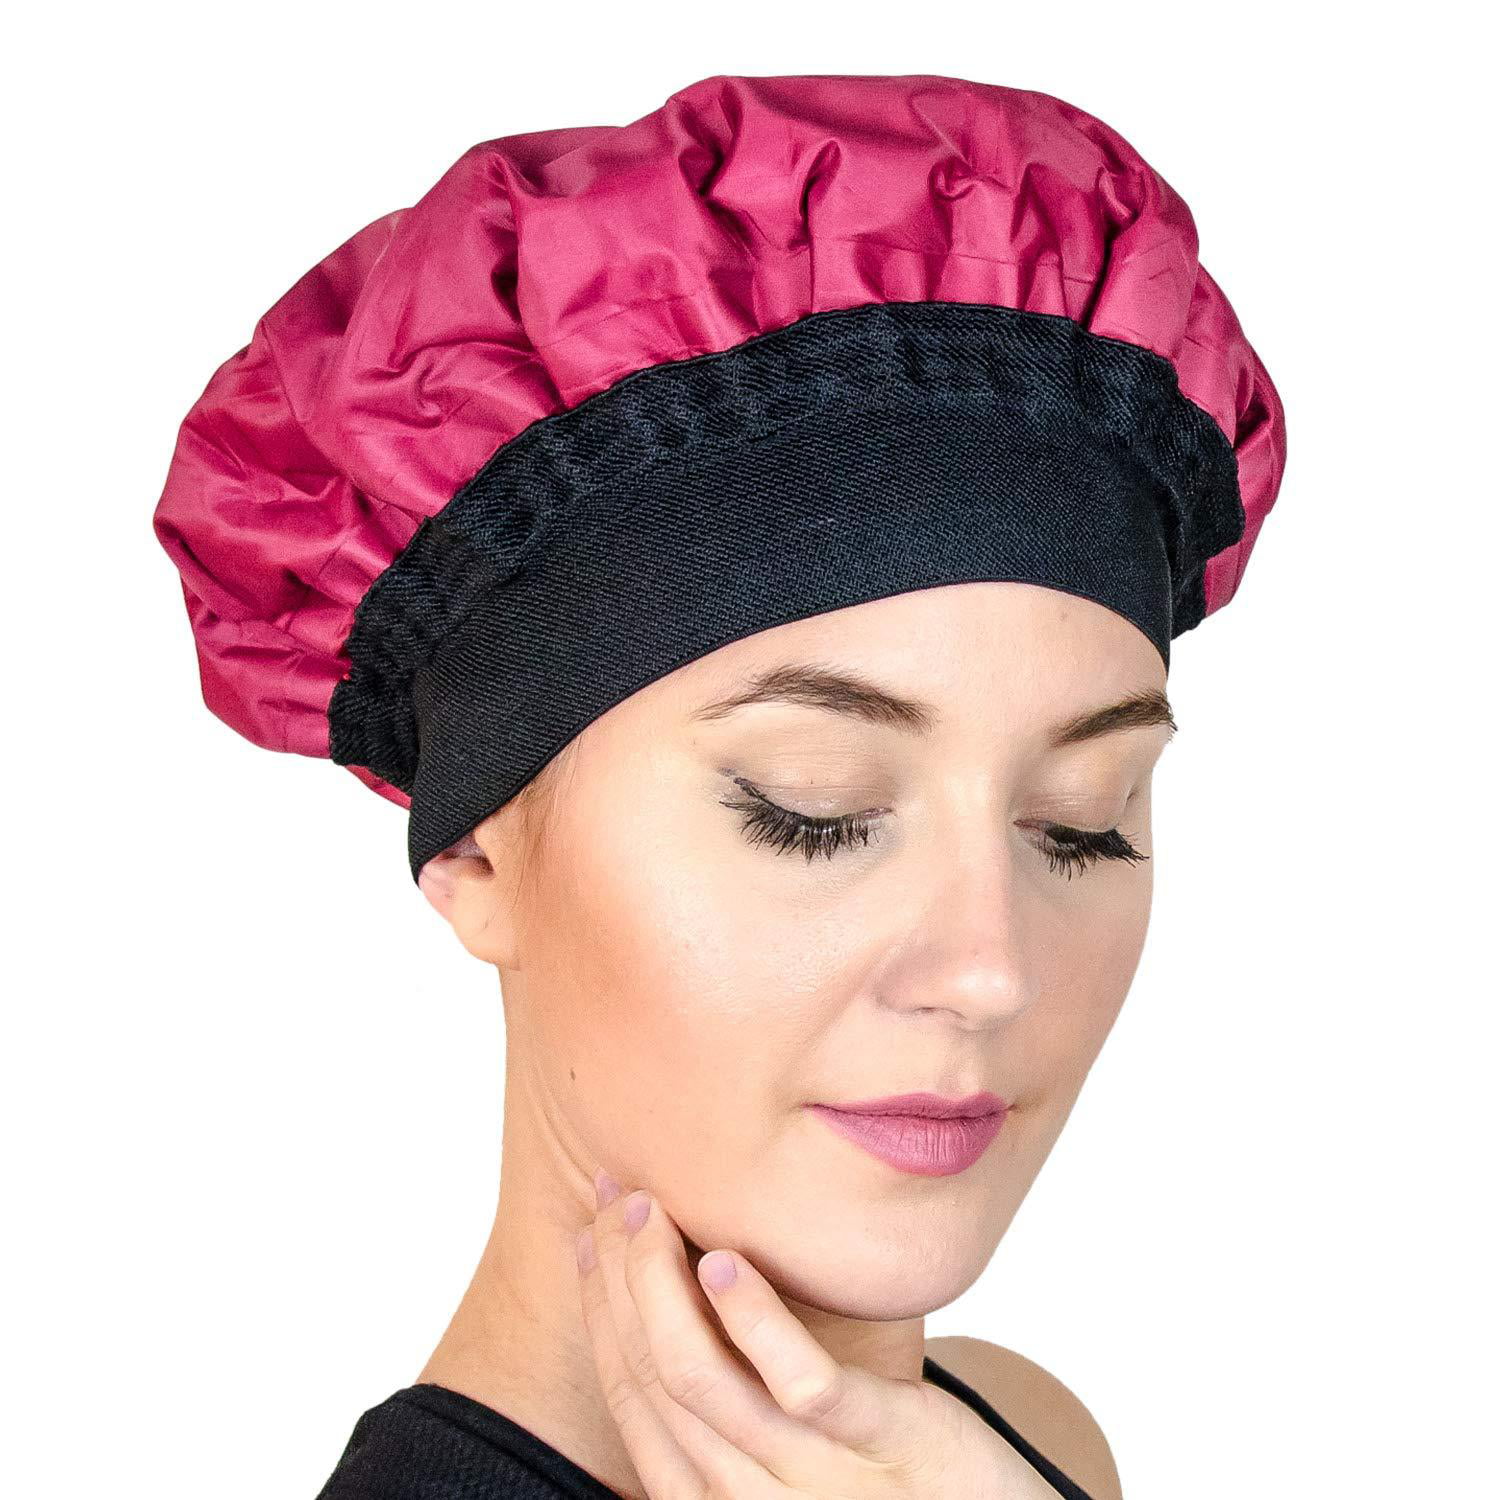 Luxury Hair Cap For Deep Conditioning A Heat Cap To Hydrate